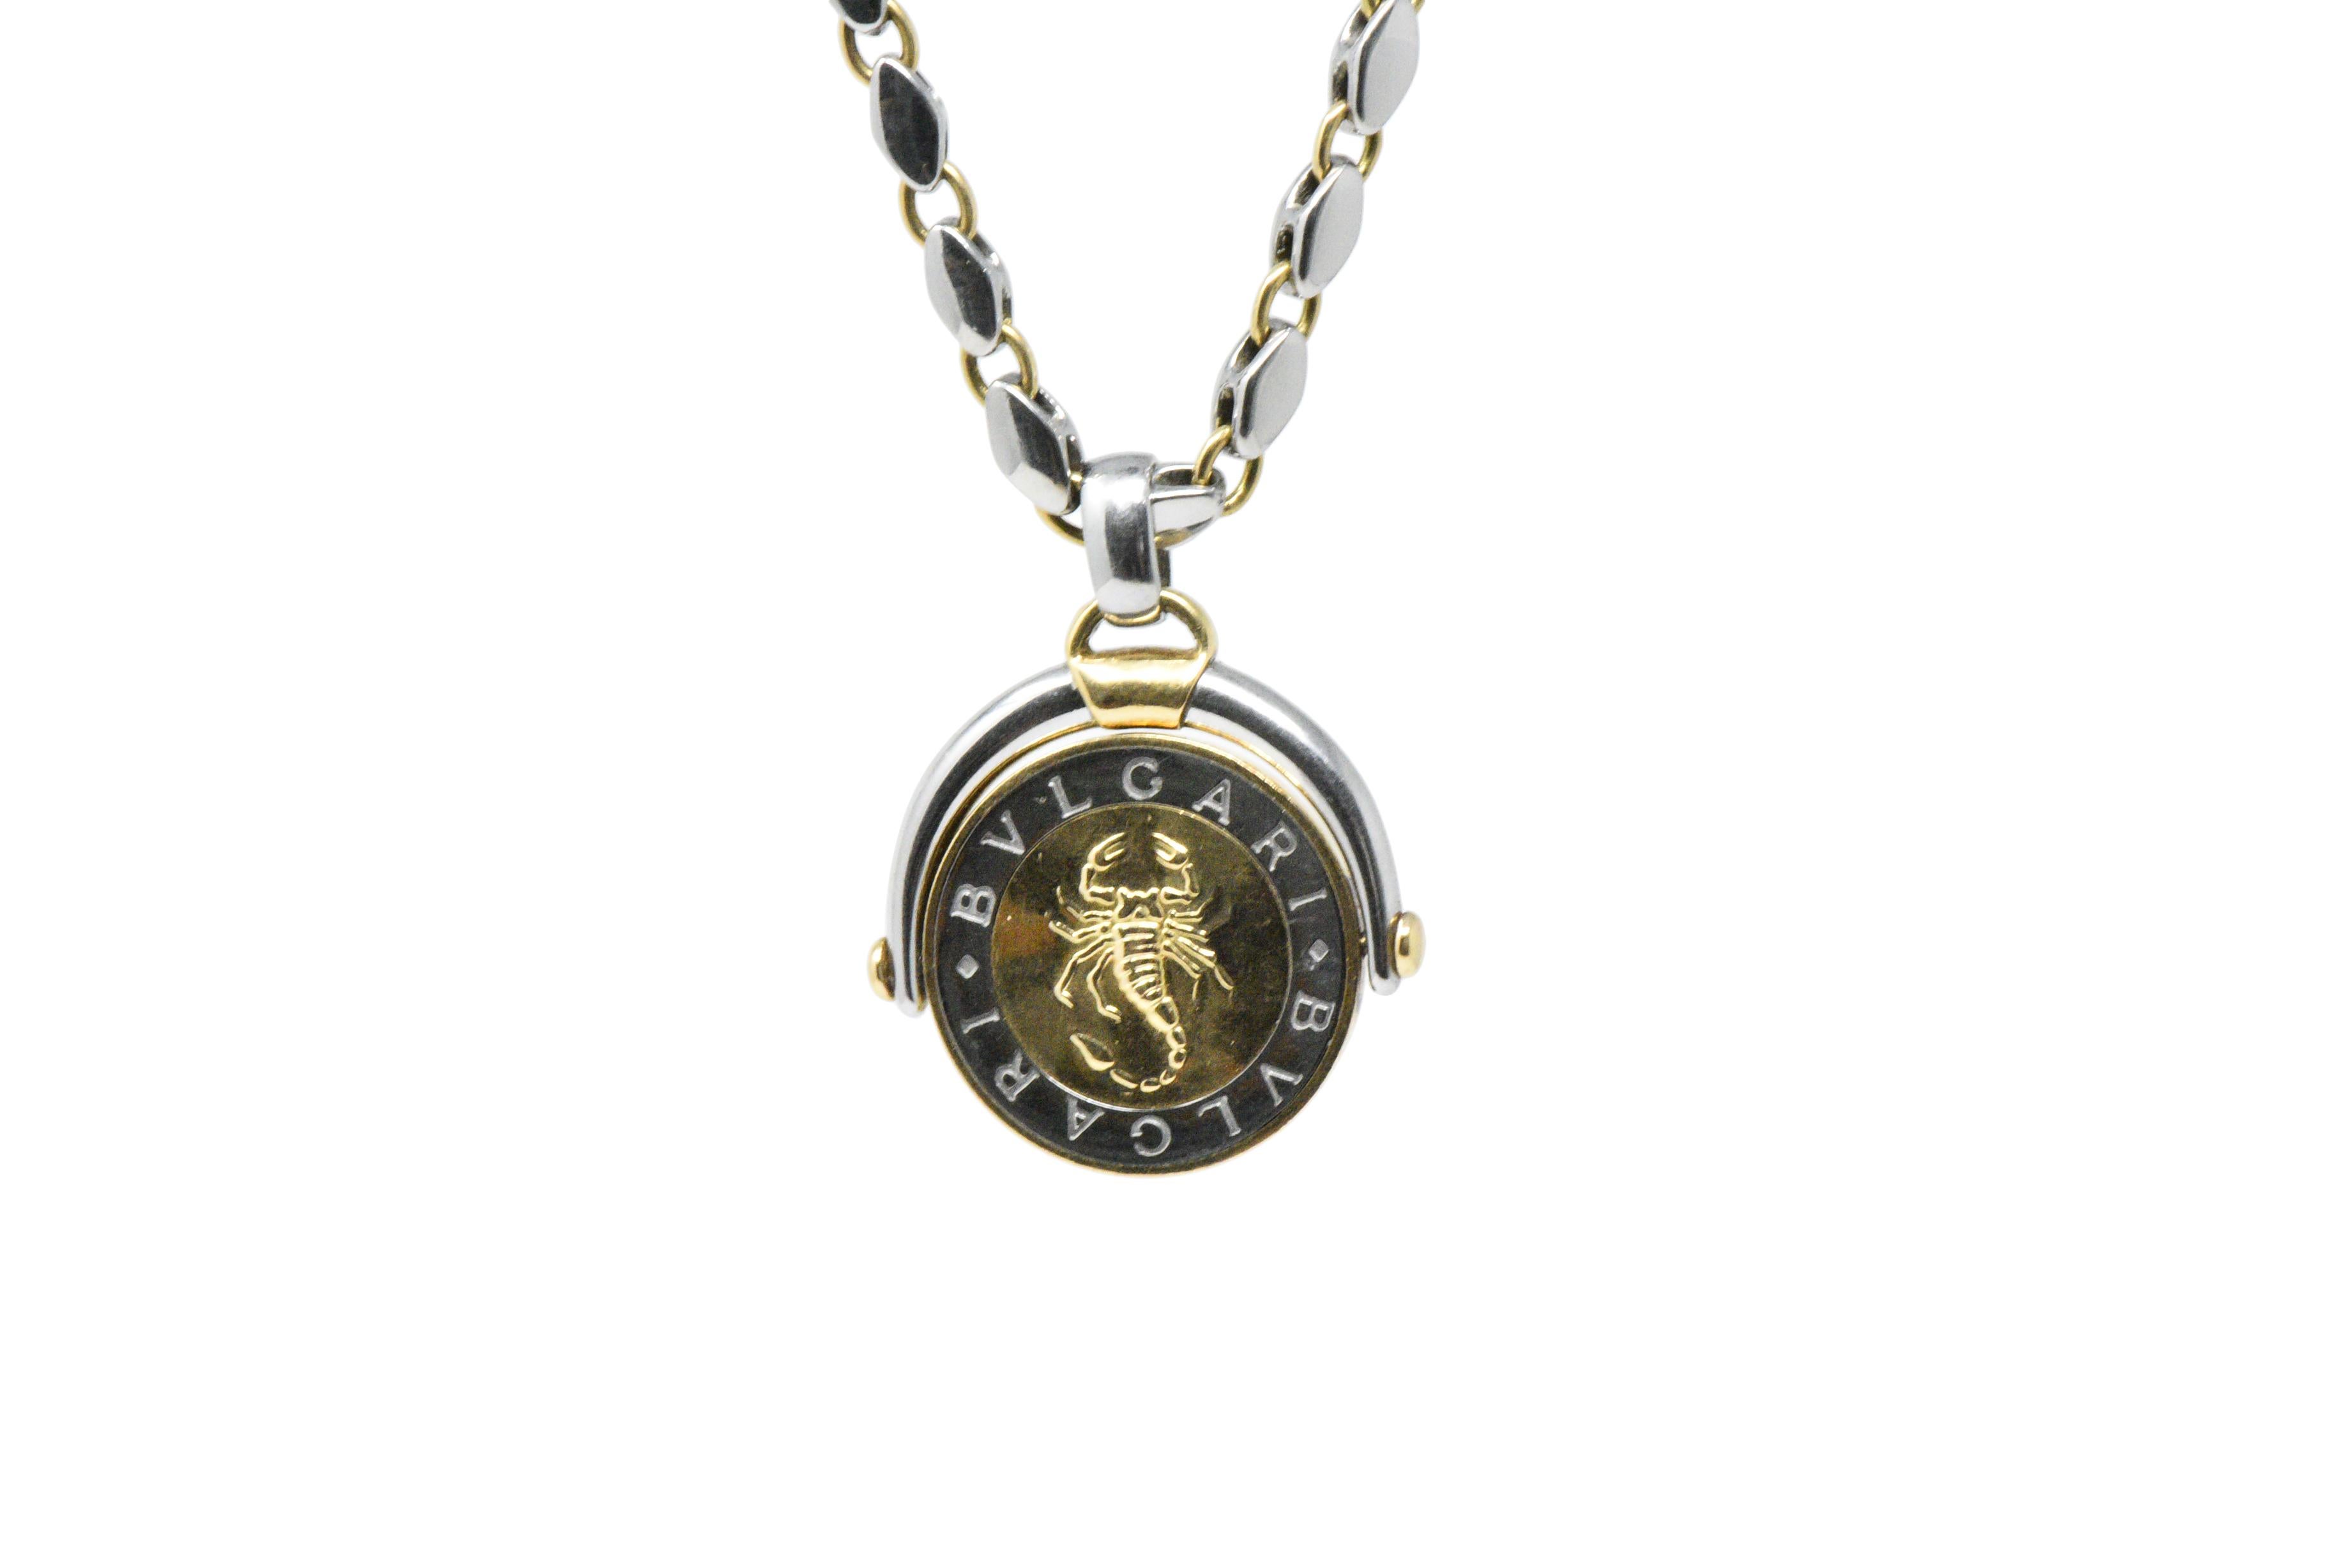 Rotating disc charm, in 18K yellow and white gold, the yellow gold center depicting a scorpion, the symbol for Scorpio in the modern zodiac

On a 18K yellow and white gold chain, completed by a 